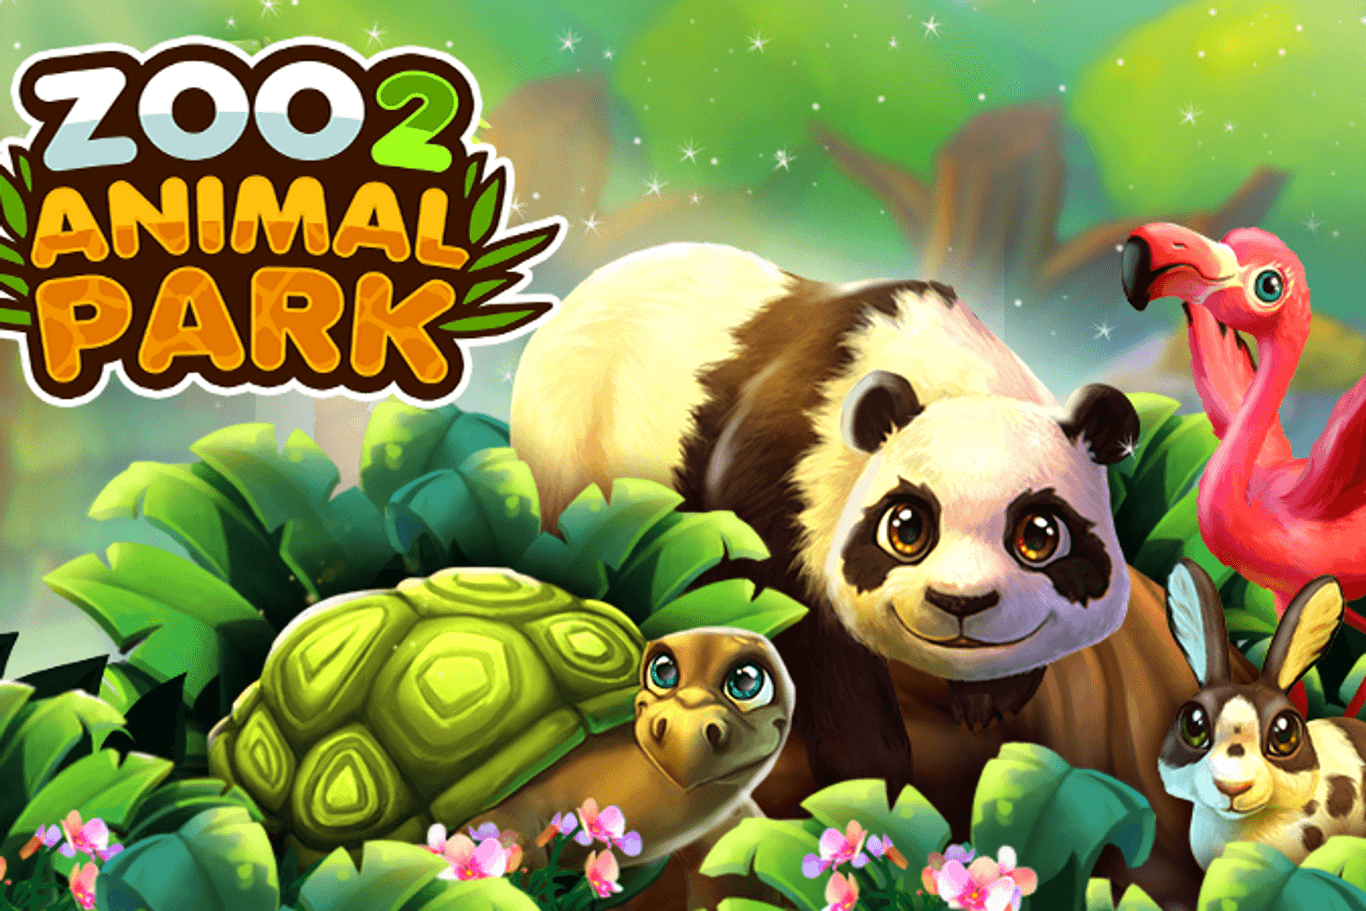 Zoo 2: Animal Park (Quelle: Upjers)